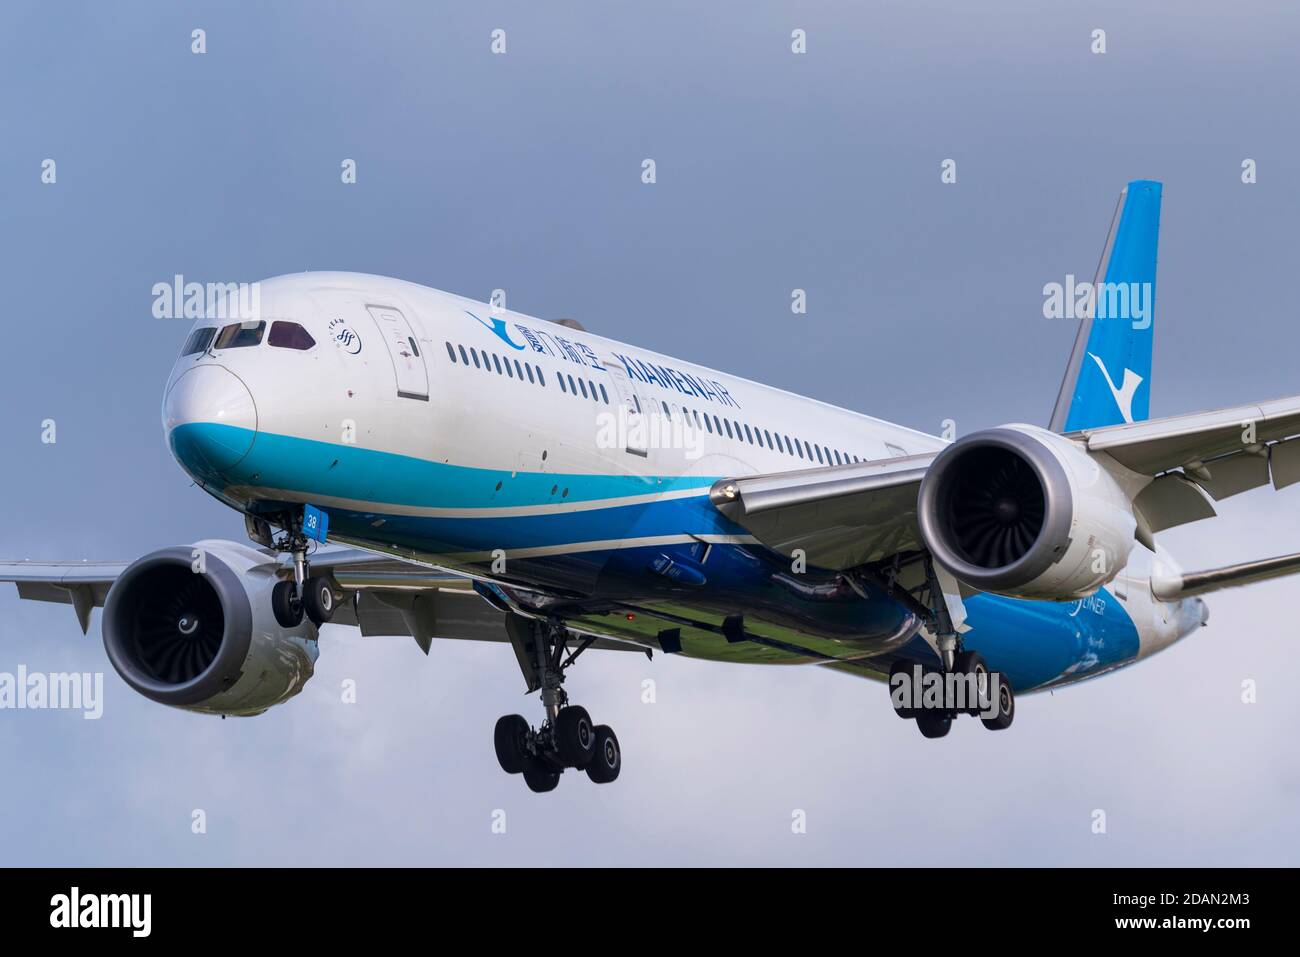 XiamenAir 787 jet airliner plane B-7838 on approach to land at London Heathrow Airport, UK, during COVID 19 lockdown. First cargo flight from China UK Stock Photo